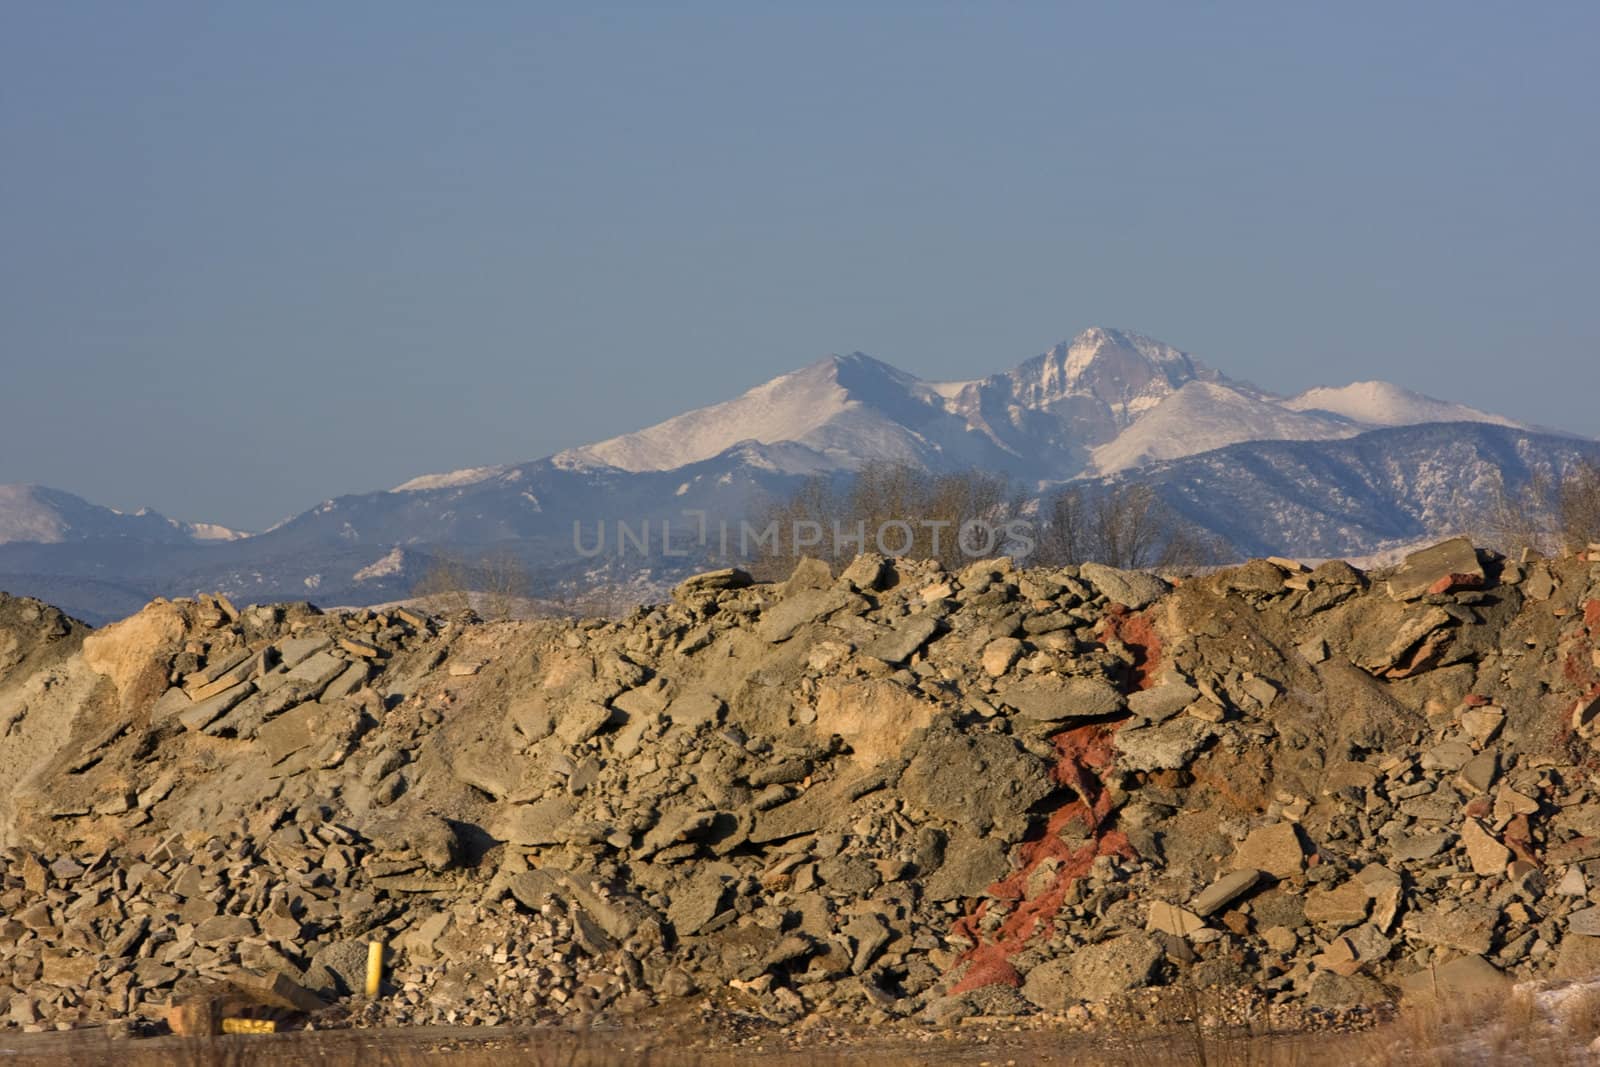 piles of concrete and construction waste obscure a view to snowy peaks of Rocky Mountains (Longs Peak in Colorado)